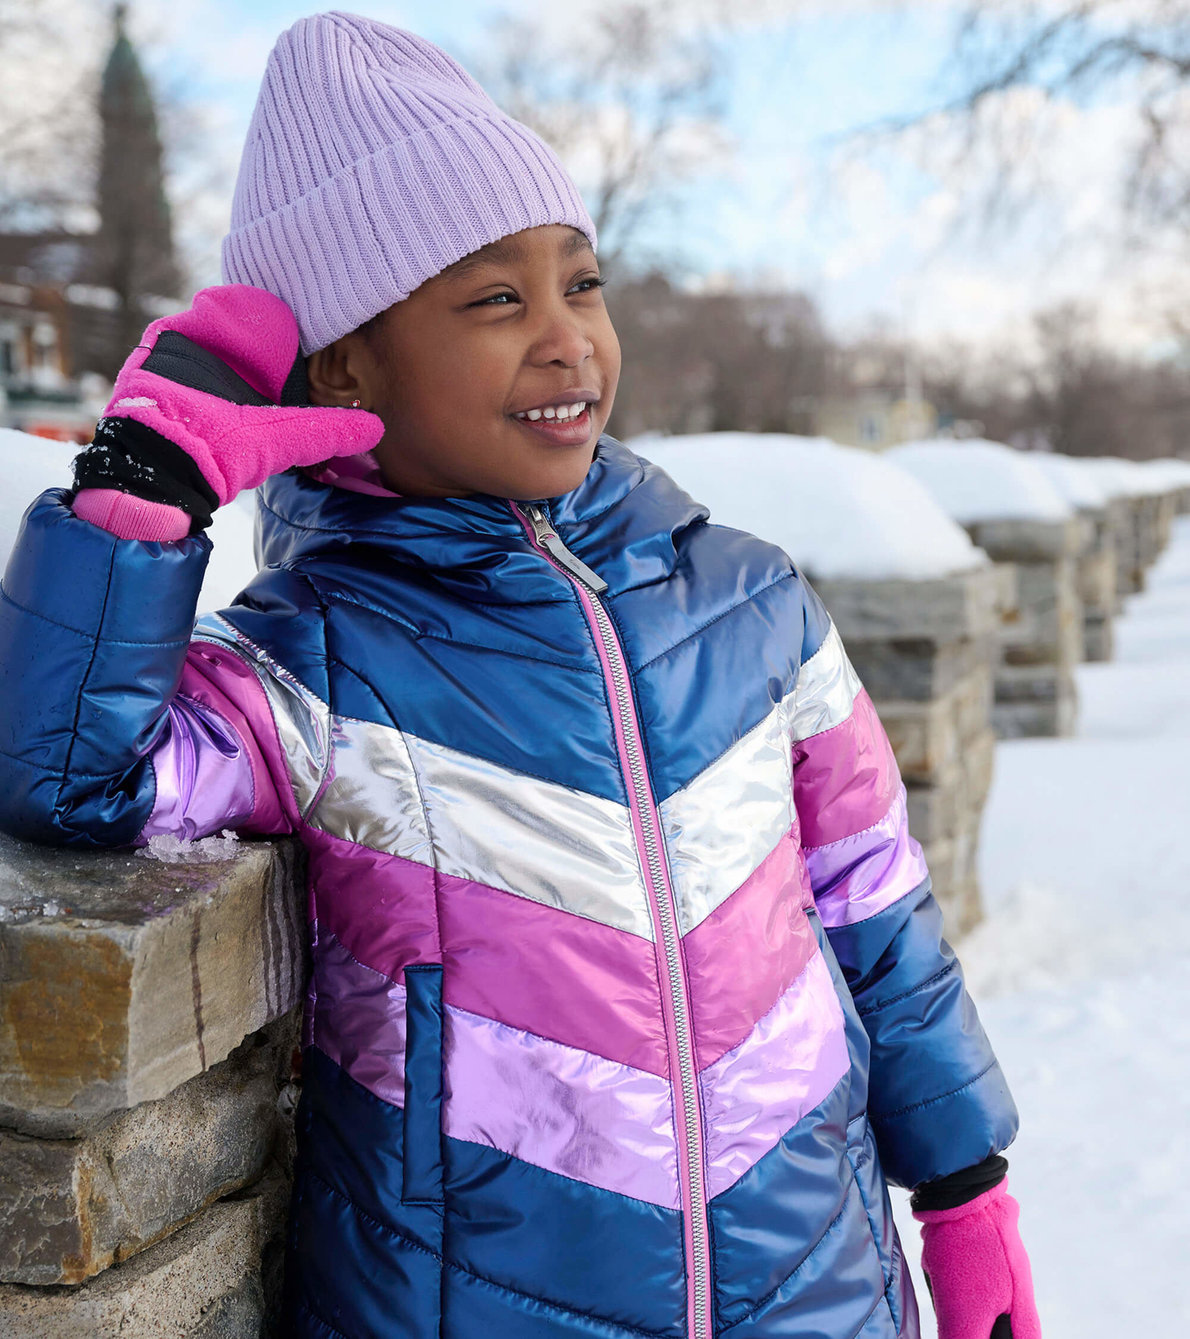 View larger image of Rainbows Kids Puffer Jacket